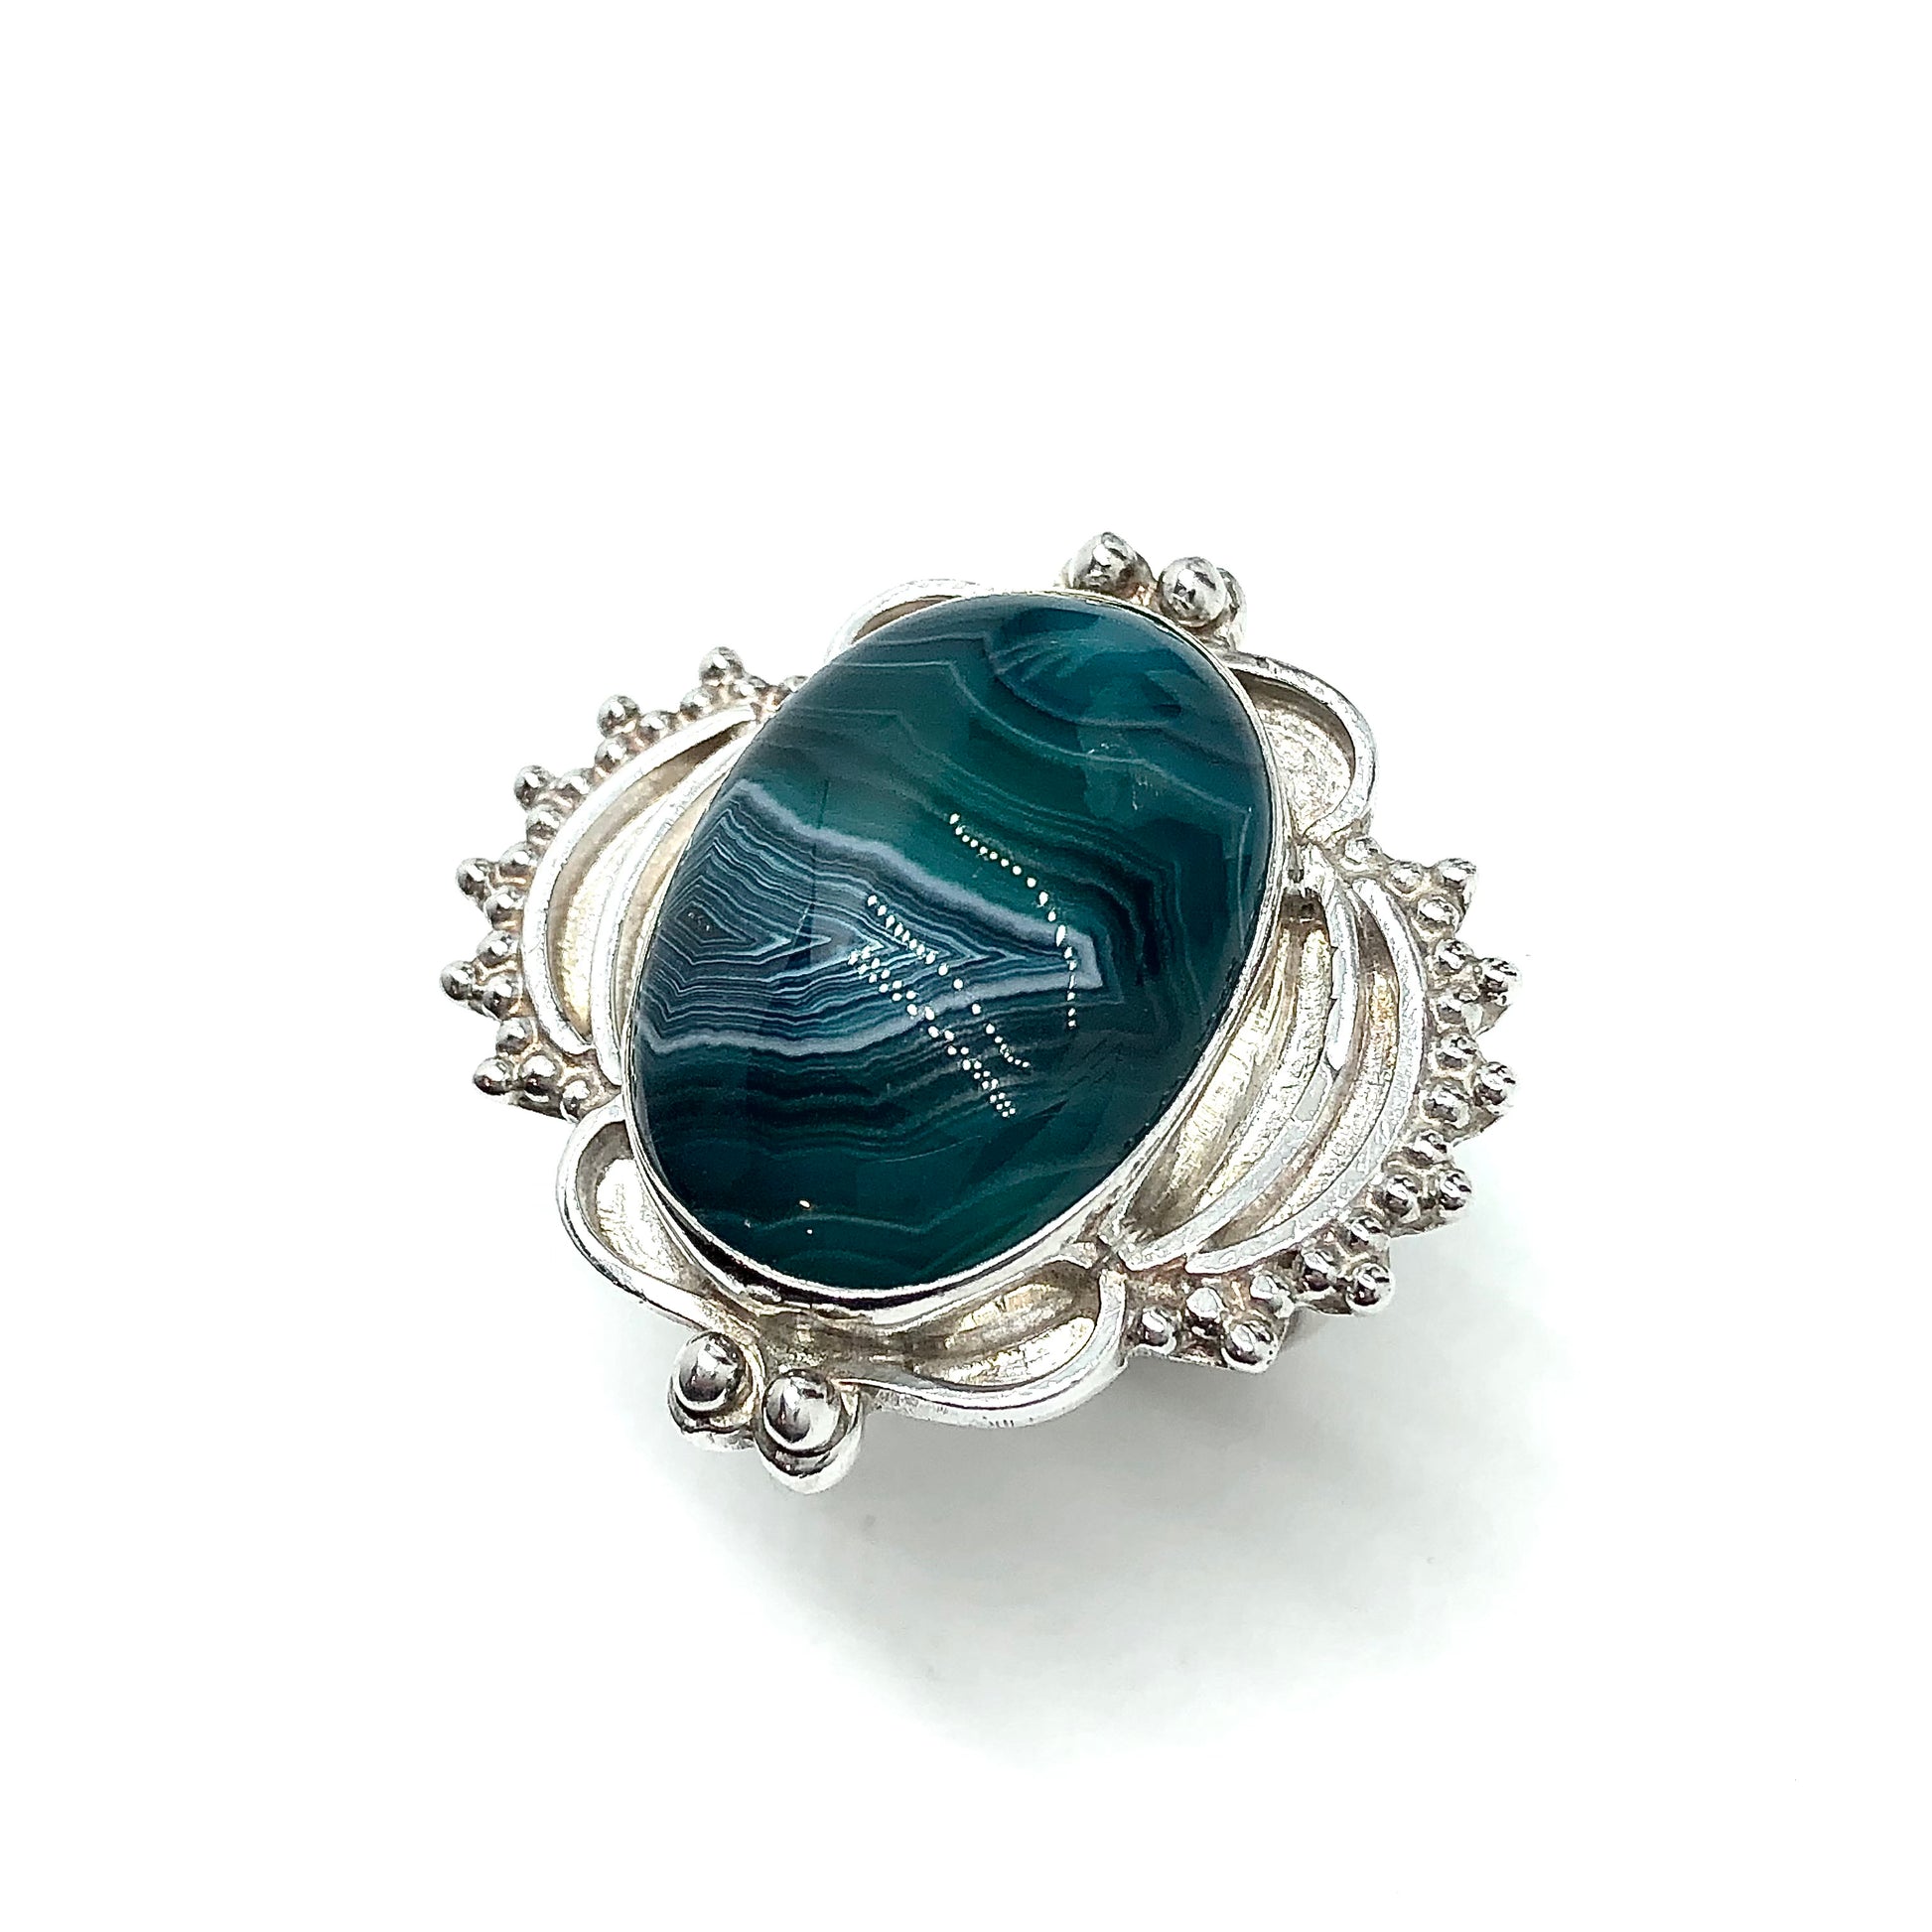 Trendy Rings Sterling Silver Teal Agate Stone Bold Boho Style 9.5 - Blingschlingers Discount Jewelry